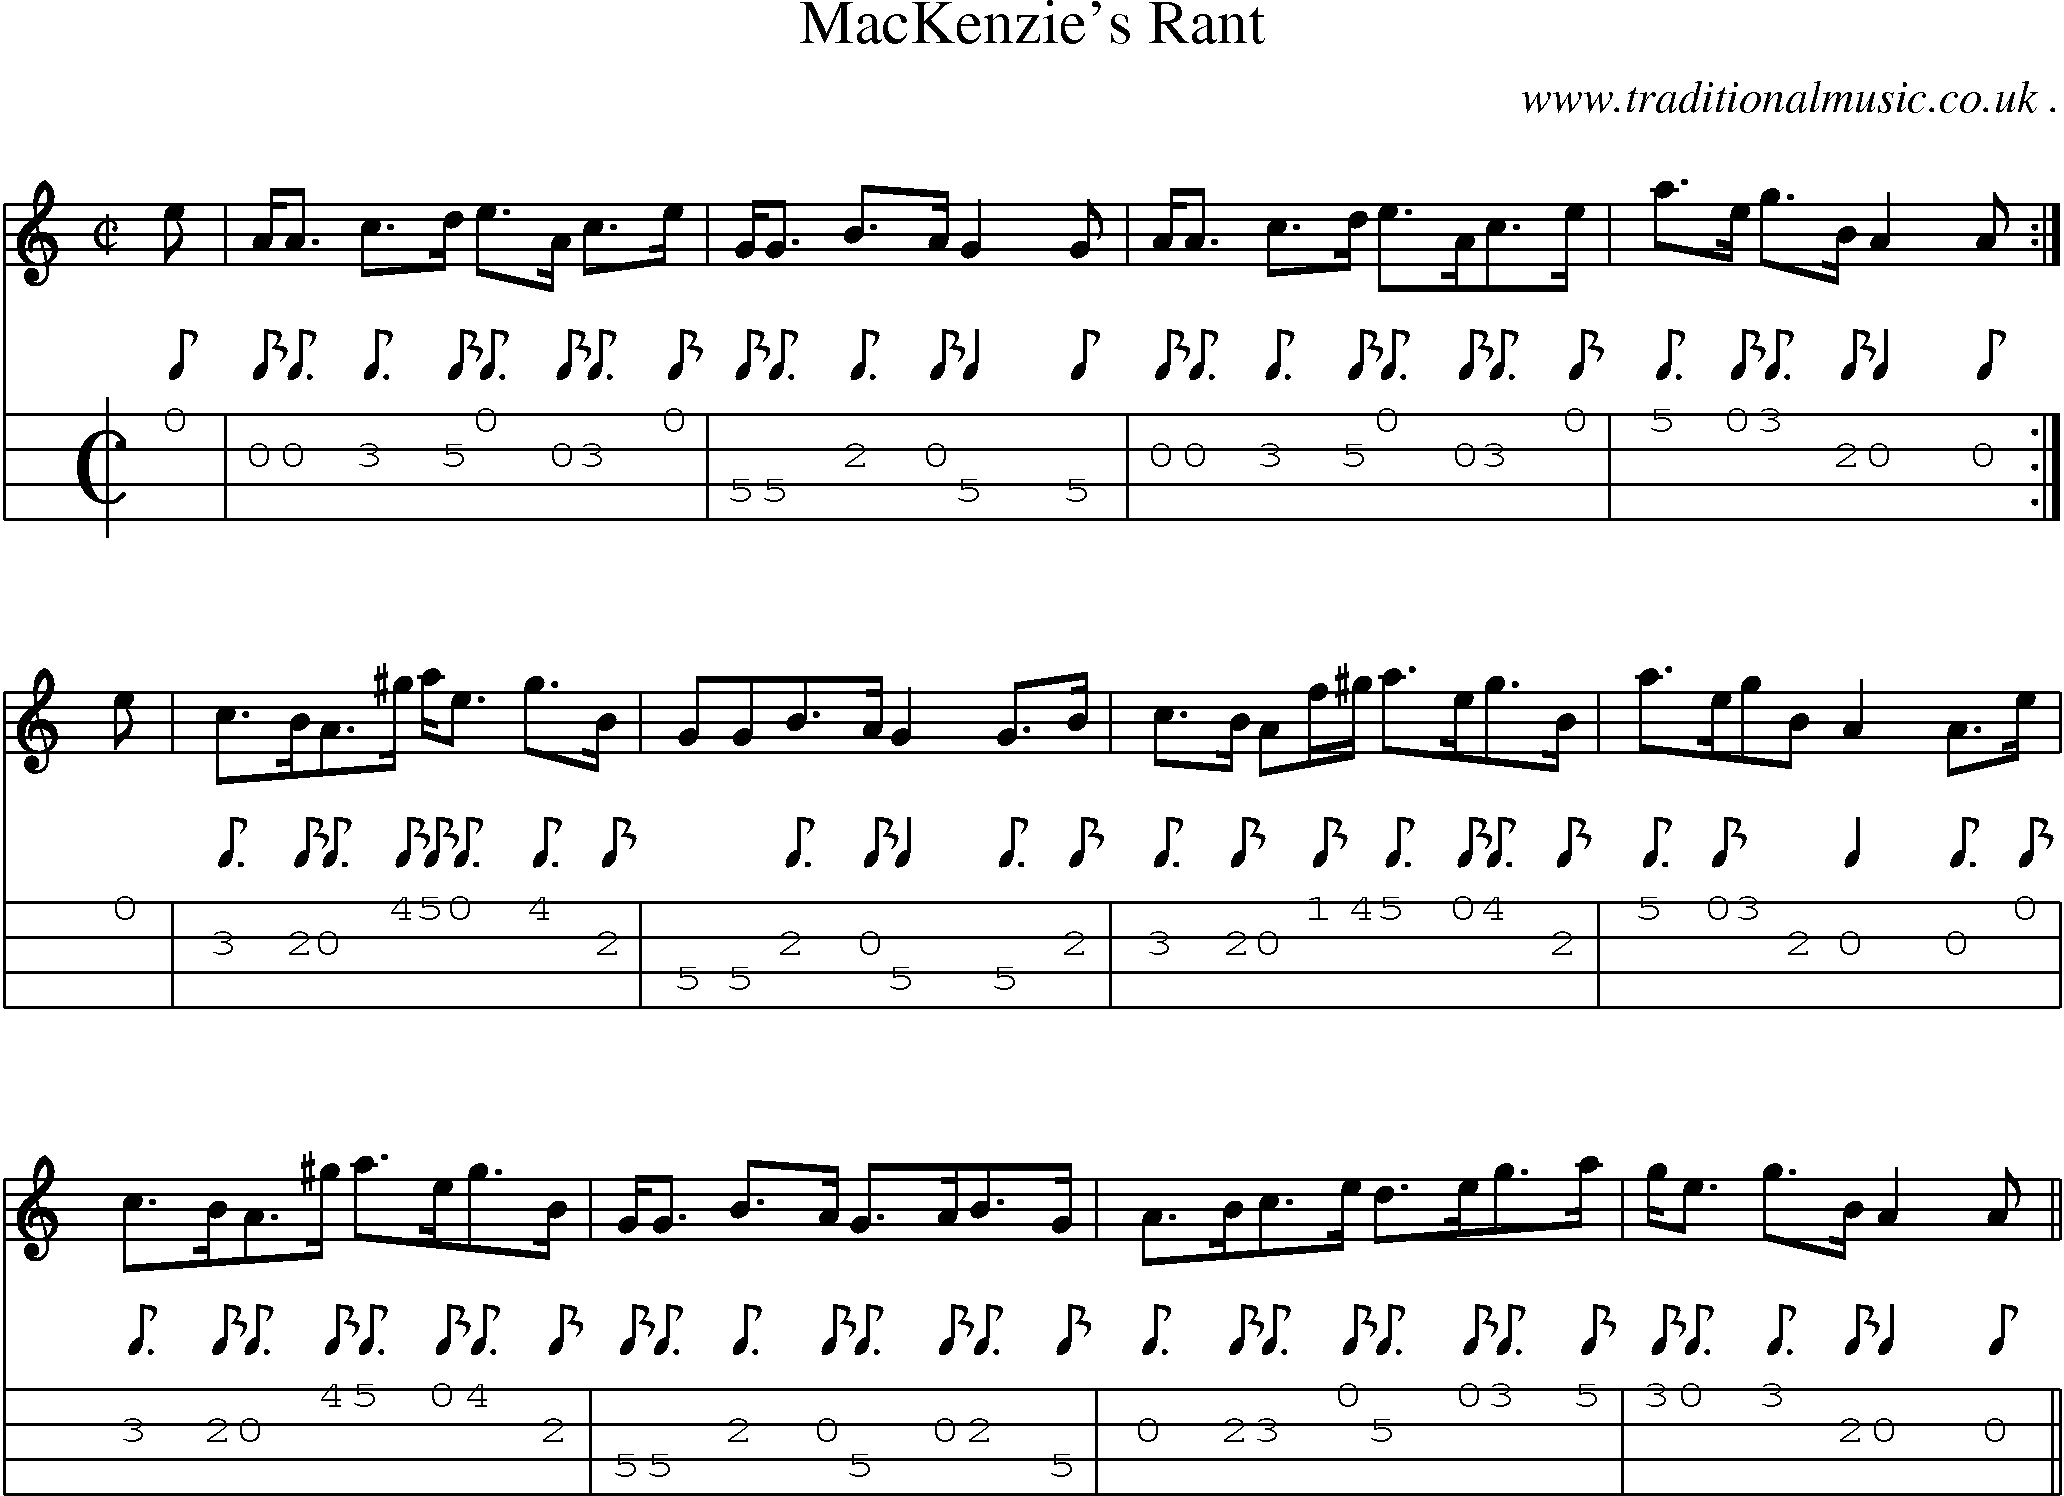 Sheet-music  score, Chords and Mandolin Tabs for Mackenzies Rant